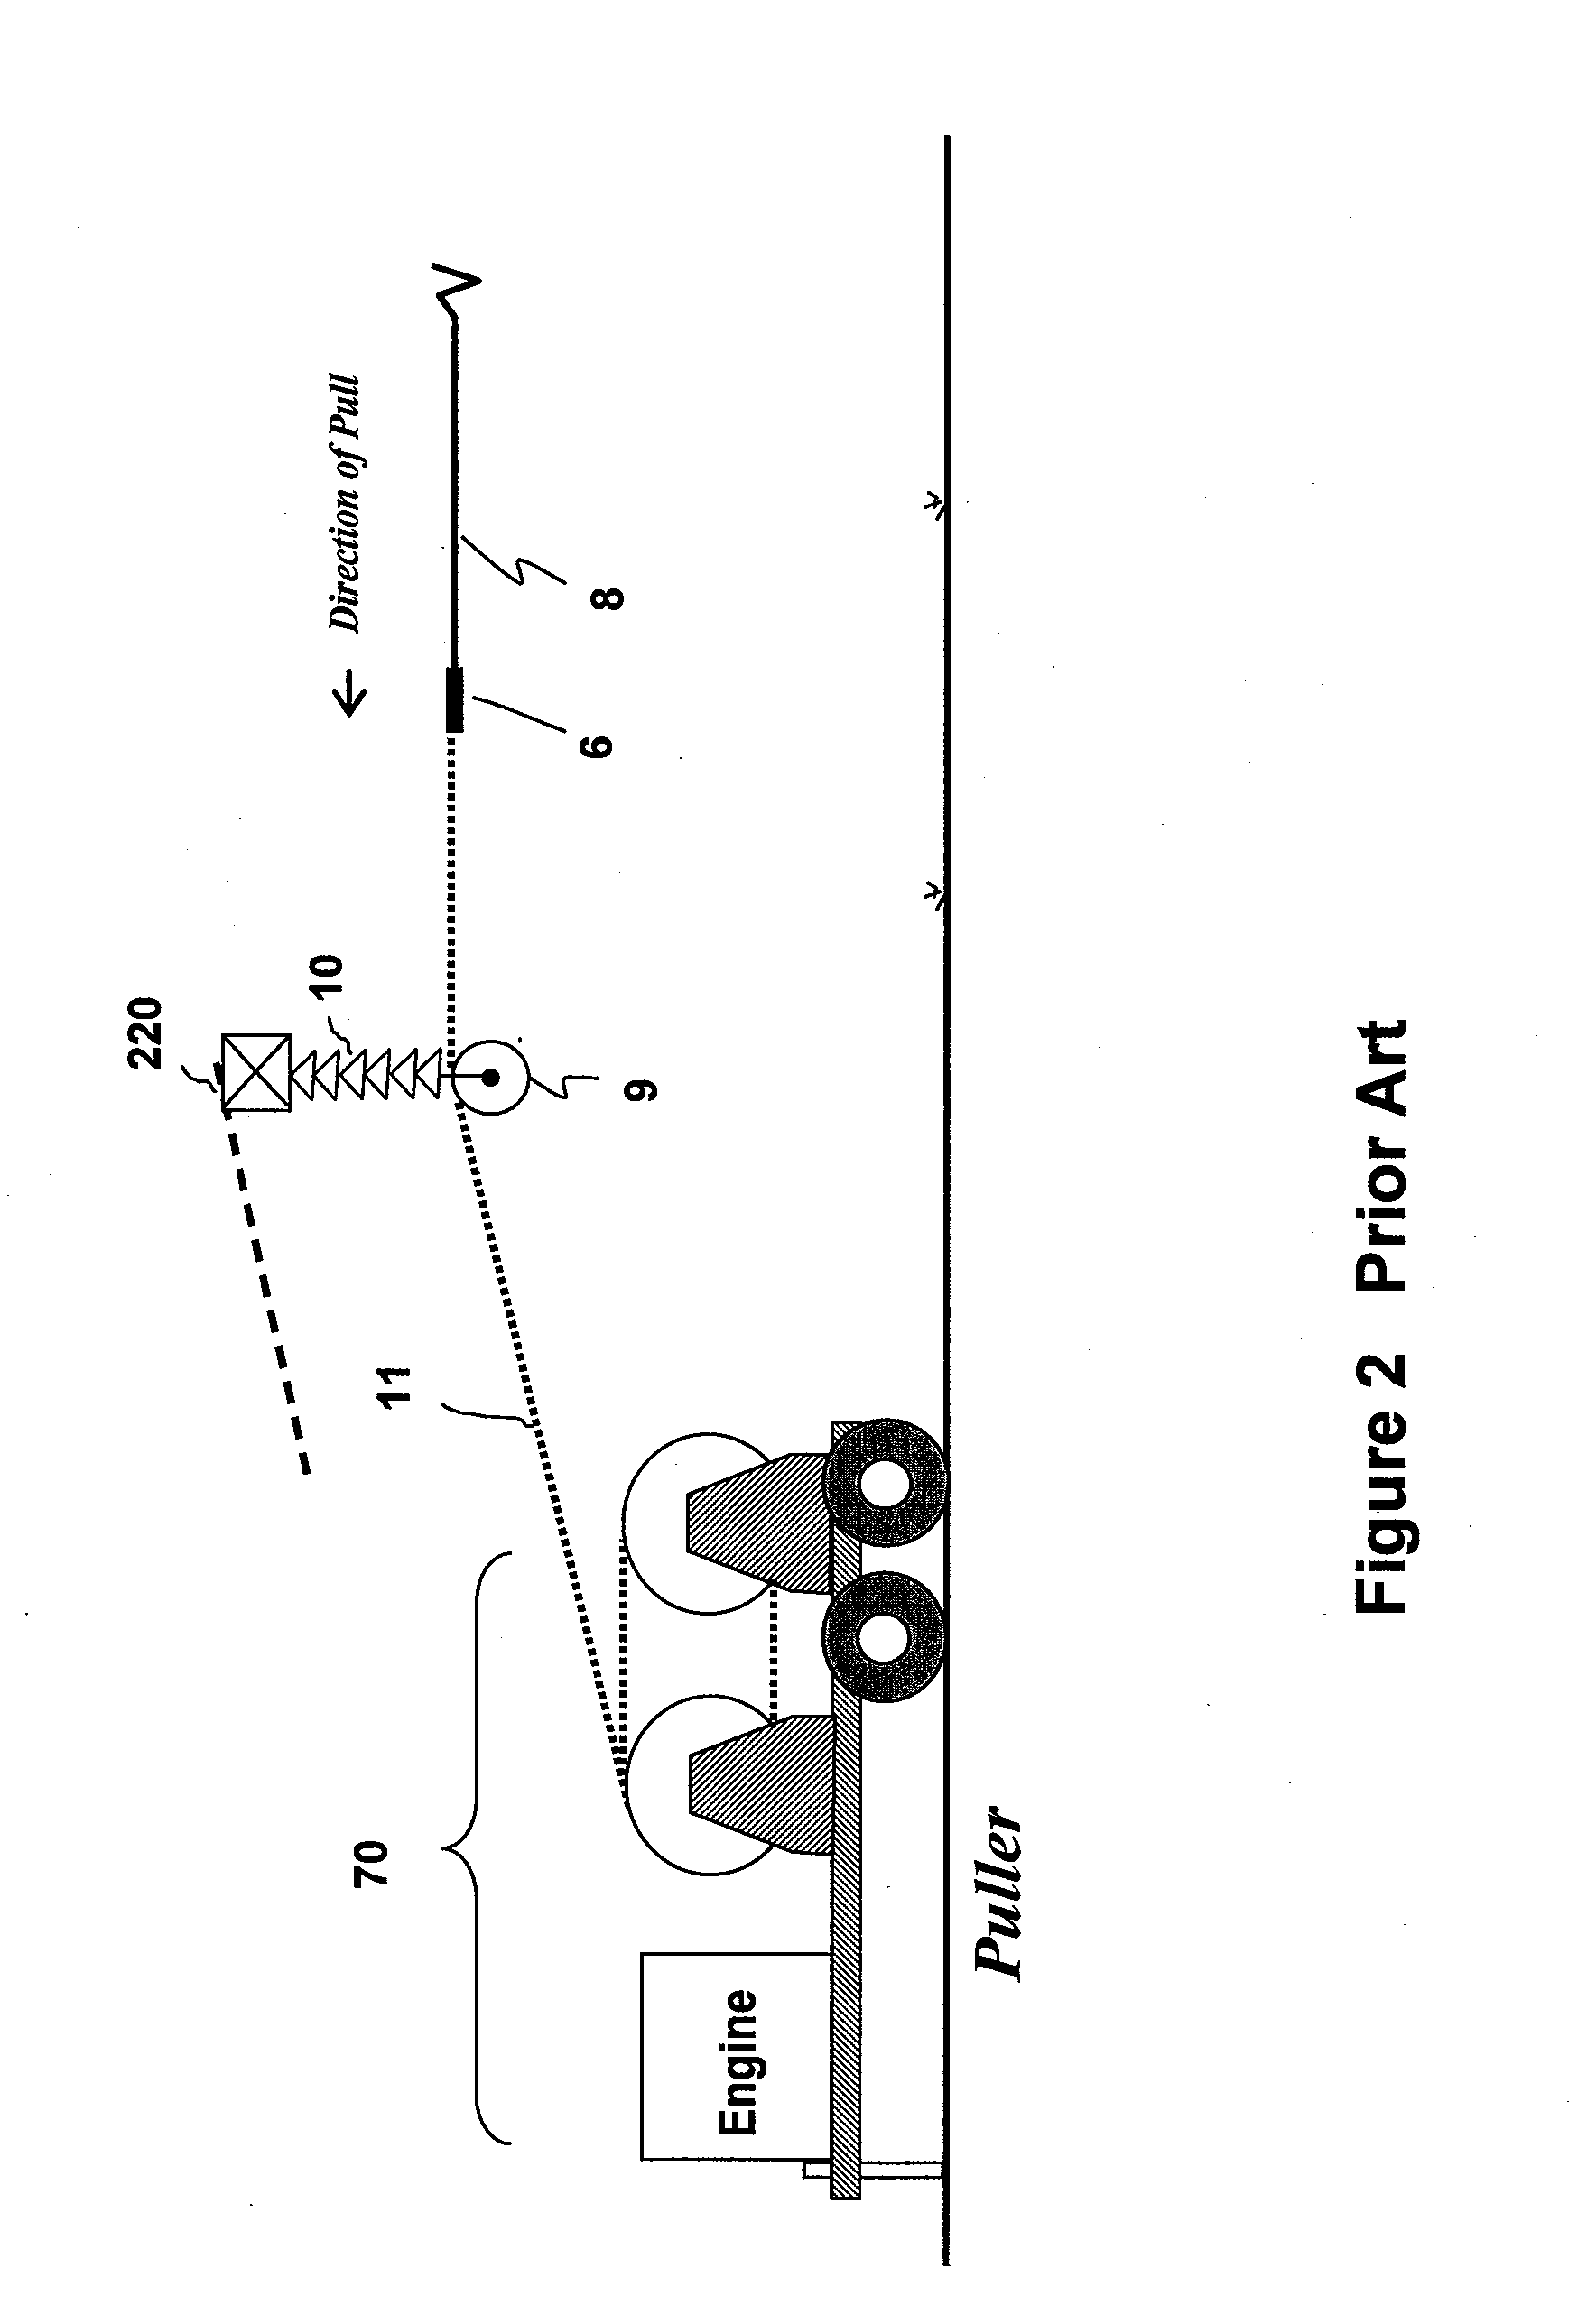 Apparatus And Method For Enhancing The Reconductoring Of Overhead Electric Power Lines